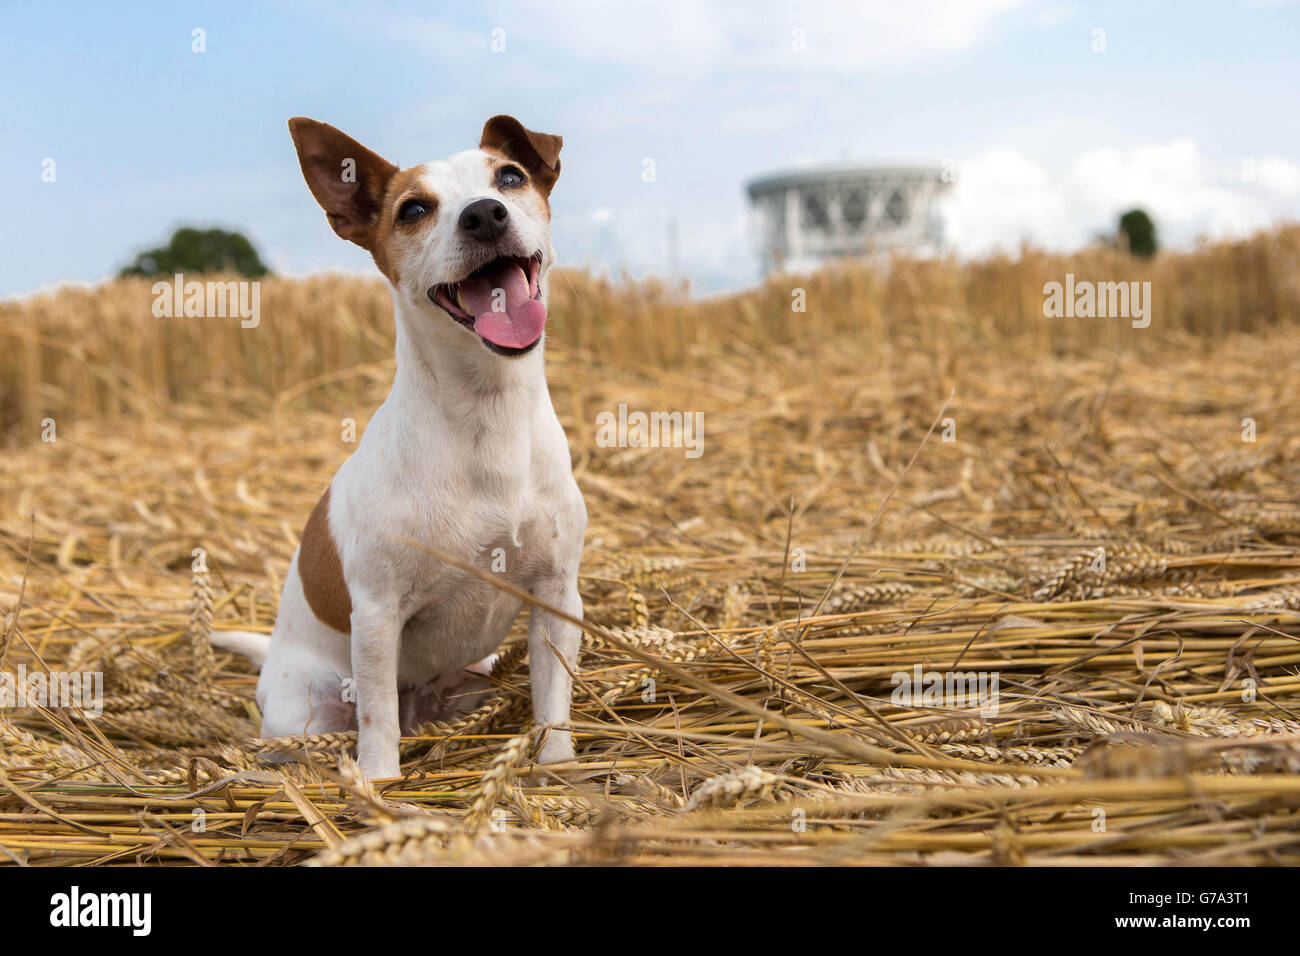 Shortie, the Jack Russell Terrier and the Ardbeg Whisky Distillery mascot,  in a 200 feet diameter crop circle in a field near Macclesfield in Cheshire  - overlooked by the Jodrell Bank Observatory,